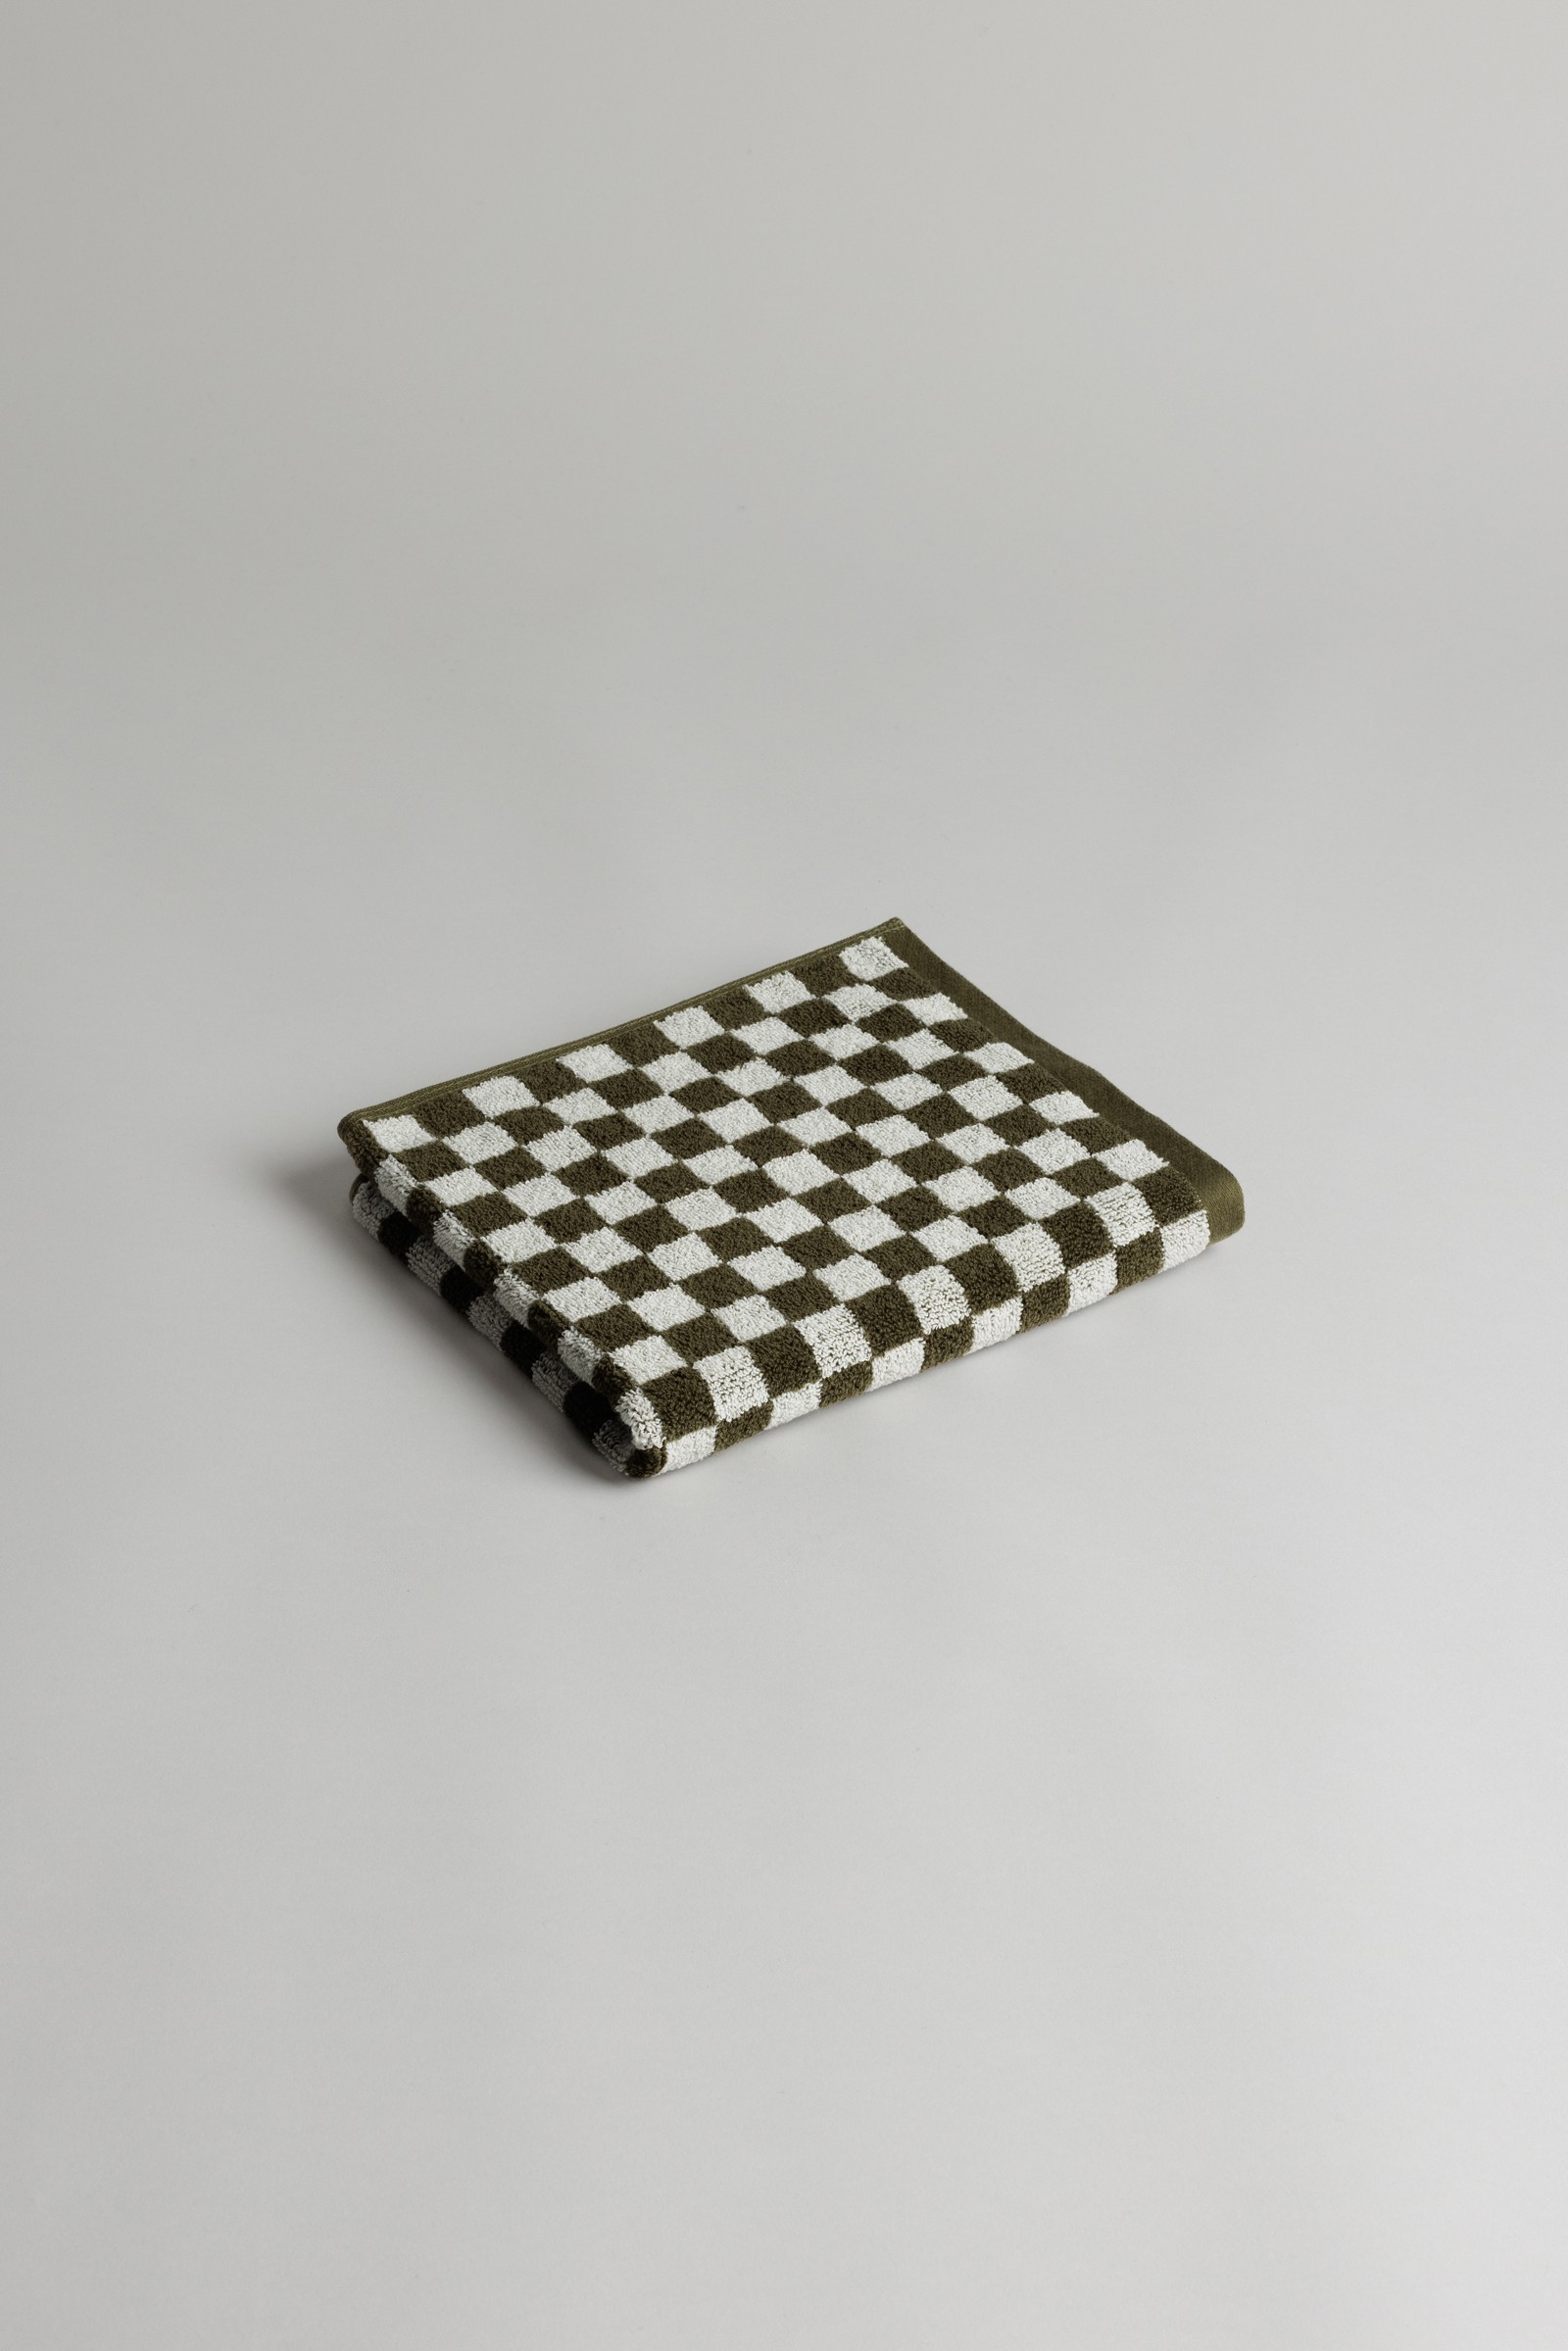 a black and white checkered napkin on a white surface